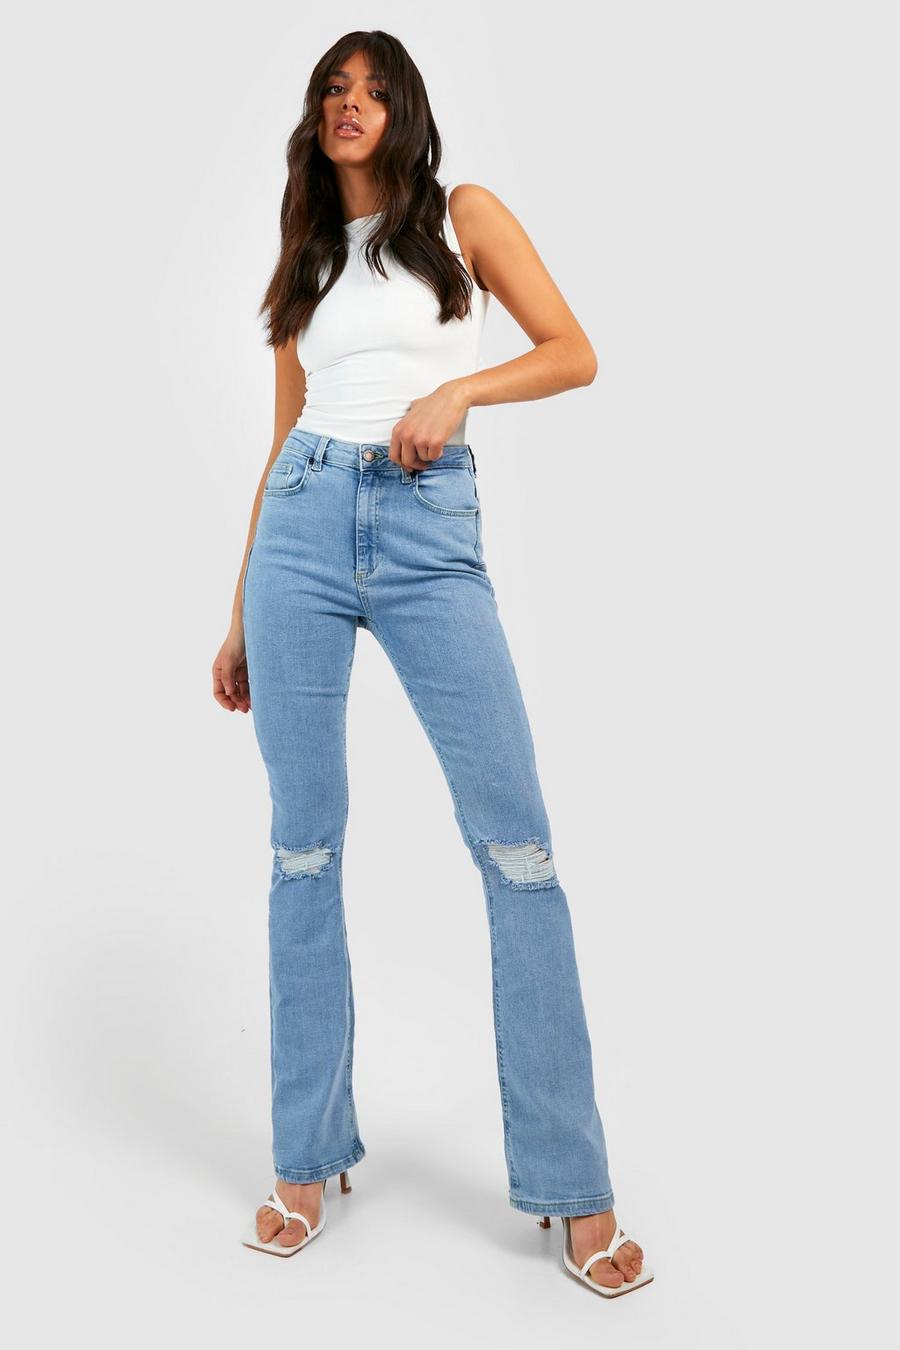 EHQJNJ Female Flare Jeans for Women High Waisted Ripped Jeans